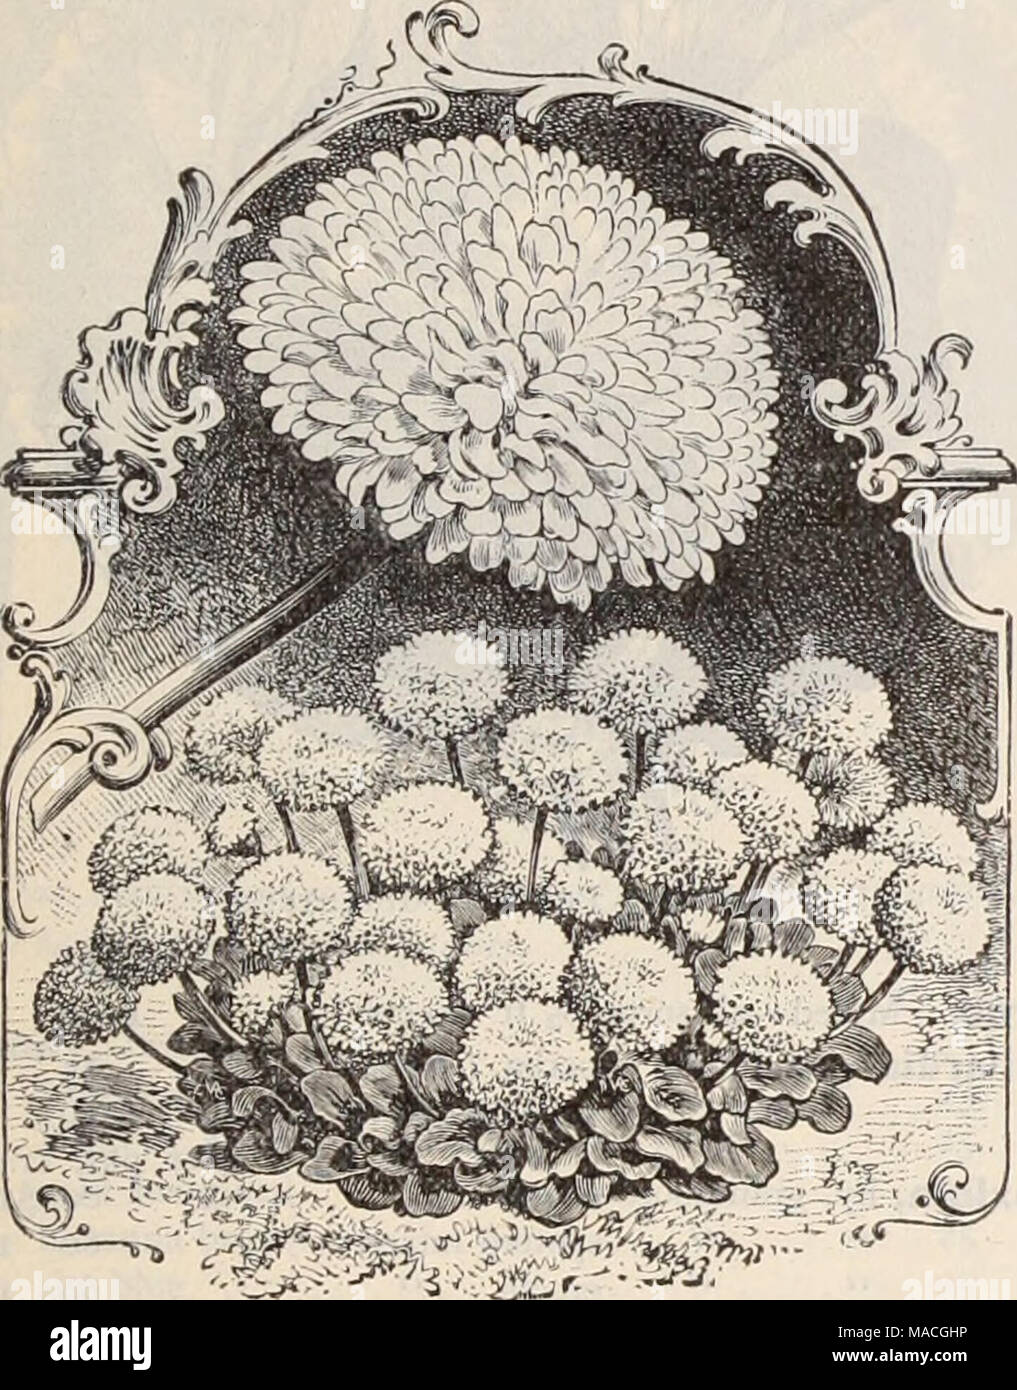 . Dreer's wholesale price list / Henry A. Dreer. . -J^yS;' , J. Bellis Perbnnis. Double Snowball. Achillea ptarmica, double white, hardy .... Alyssum maritimum {Sweet Alys^um) lb. $l./^o Tom Thumb, dtvarf, coinpact, lb. $2.00 . Little Gem, &quot; While Carpet,'^ very d^varf. saxatile compactum, yellow perennial . . Ampelopsis Veitchii [Boston or Japanese Ivy) lb. $1.50 Antirrhinum majus, mixed, extra fine strain . Firefly, hri'^ht red Queen of the North, white Niobe, white and crimson Nanum picturatum, striped Tom Thumb, yellow &quot; &quot; mixed. Giant, 'while &quot; scarlet &quot; yellow .  Stock Photo